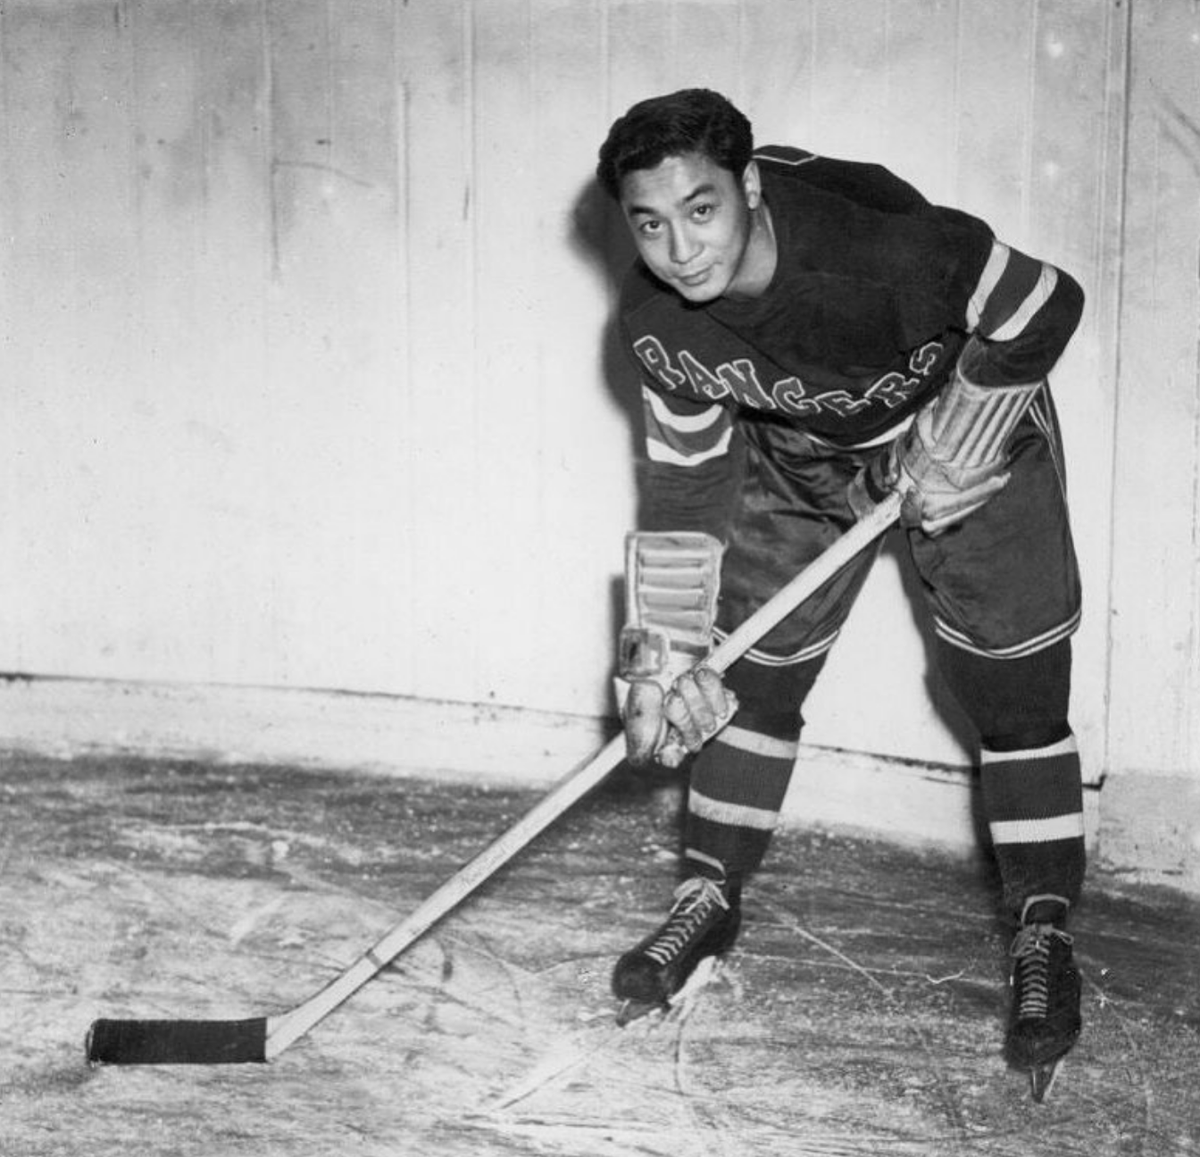 Larry Kwong, a Chinese Canadian hockey player, was the first player of Asian descent in the NHL. Kwong was called up to the big leagues in March, 1948, becoming the first person of color to play in the NHL.

#larrykwong #nhl #icehockey #youthhockey #diversity #hockeyisforeveryone